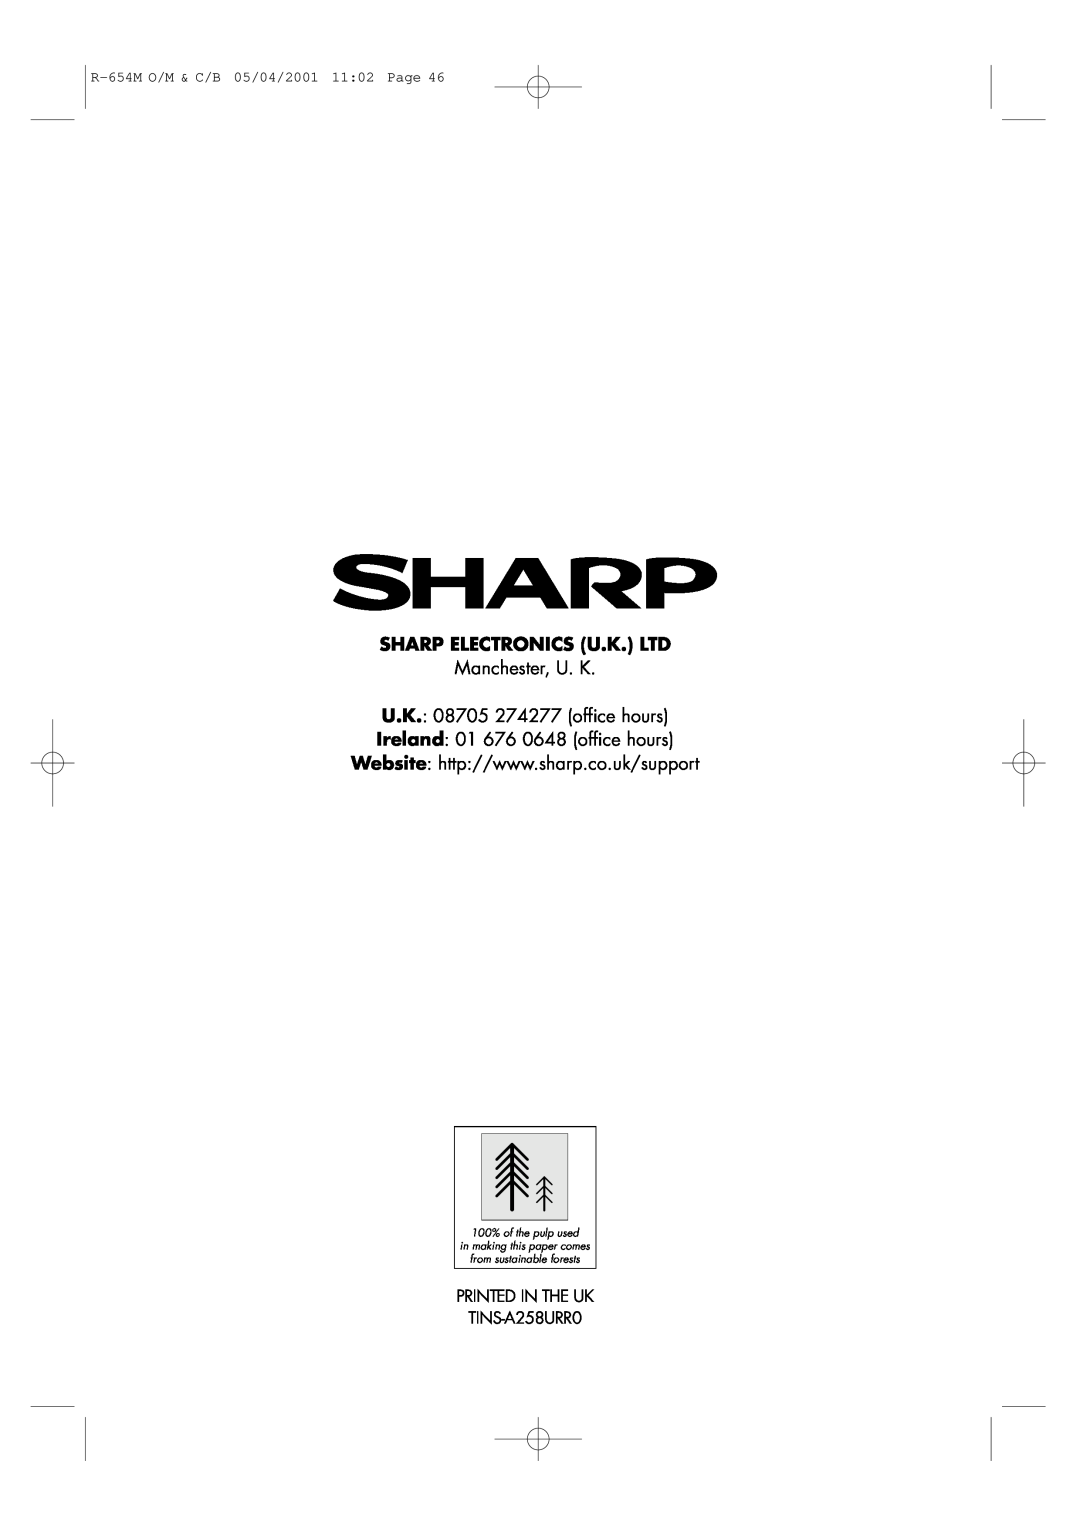 Sharp R-654M Manchester, U. K U.K. 08705 274277 office hours, Ireland 01 676 0648 office hours, from sustainable forests 